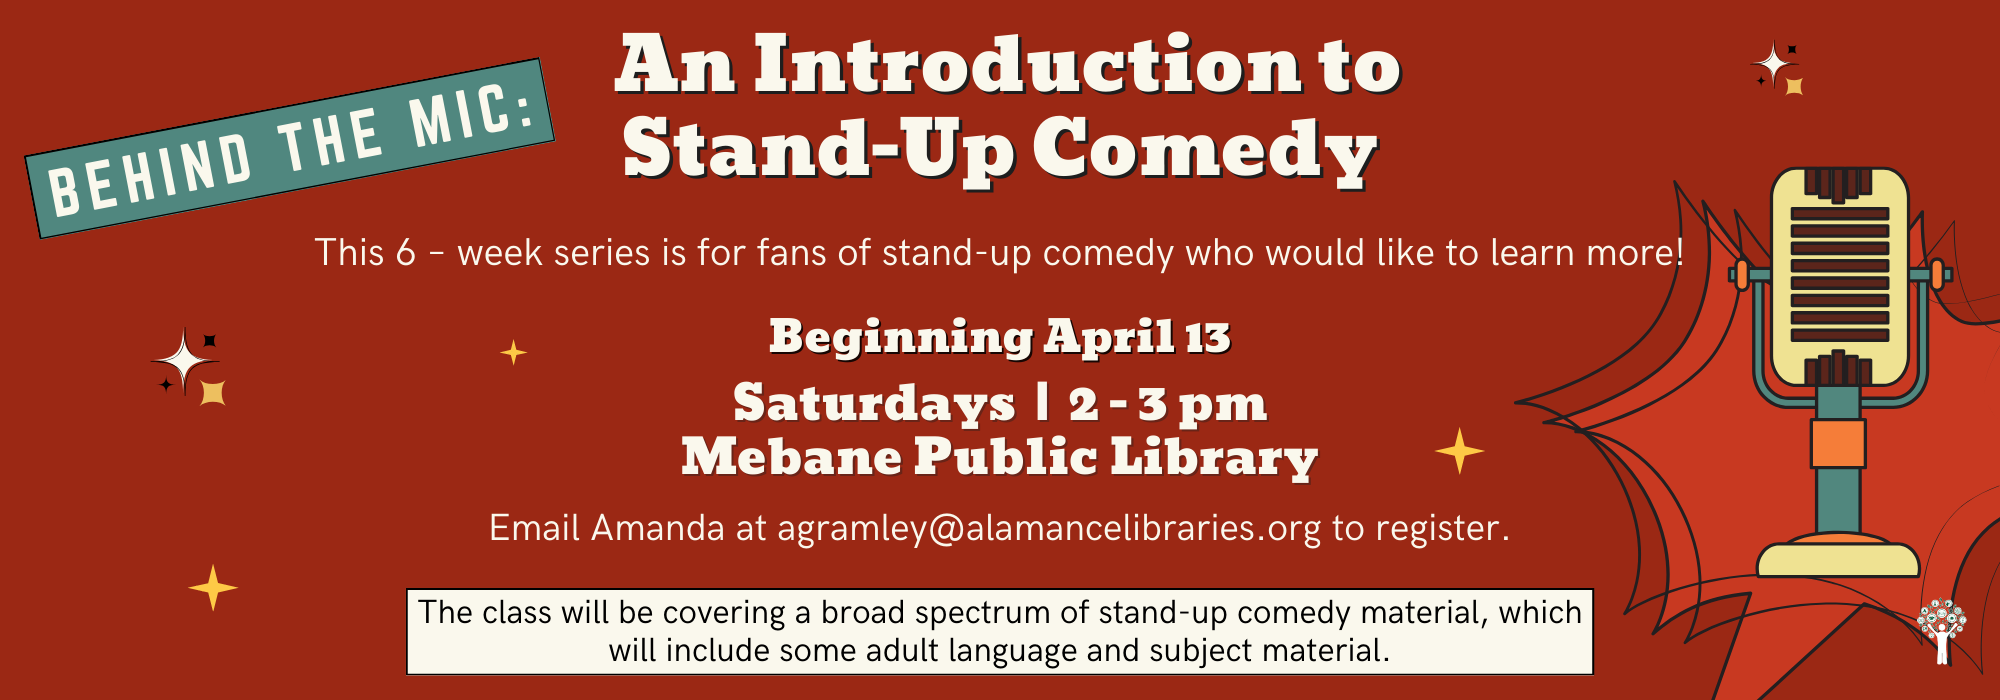 4.13 at 2 pm - Stand-Up Comedy at Mebane